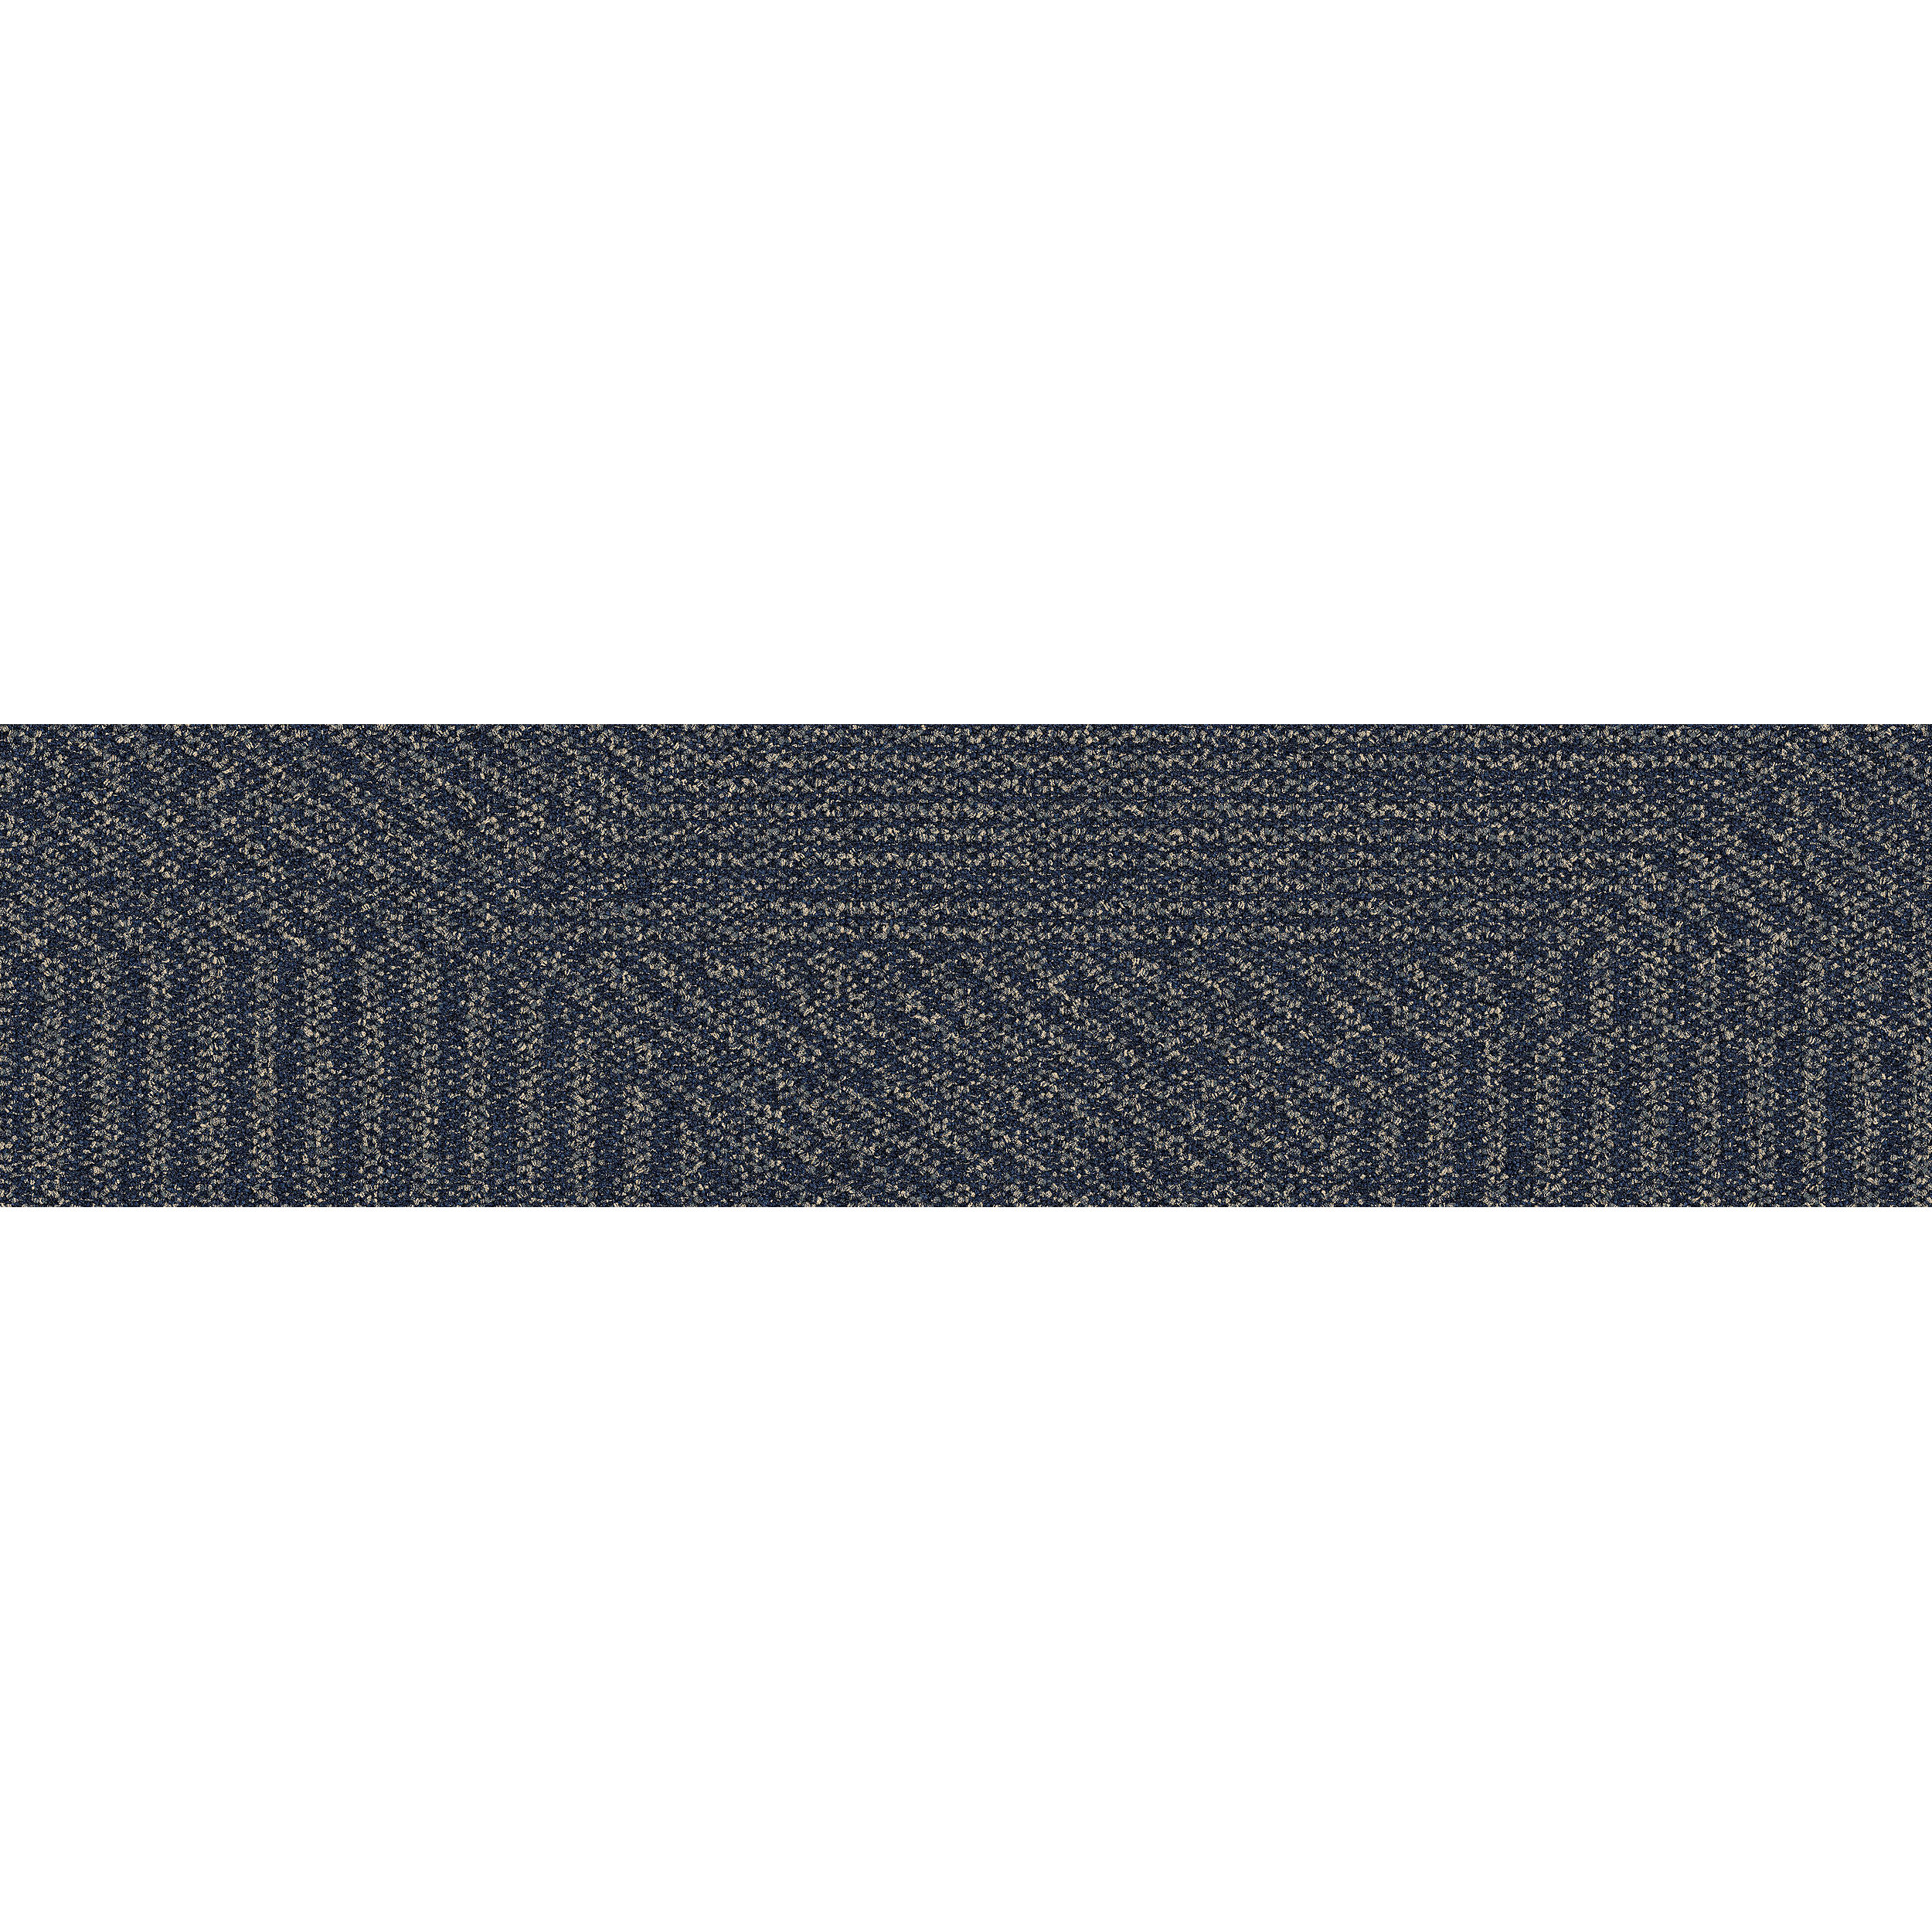 Open Air 407 Carpet Tile in Navy image number 6